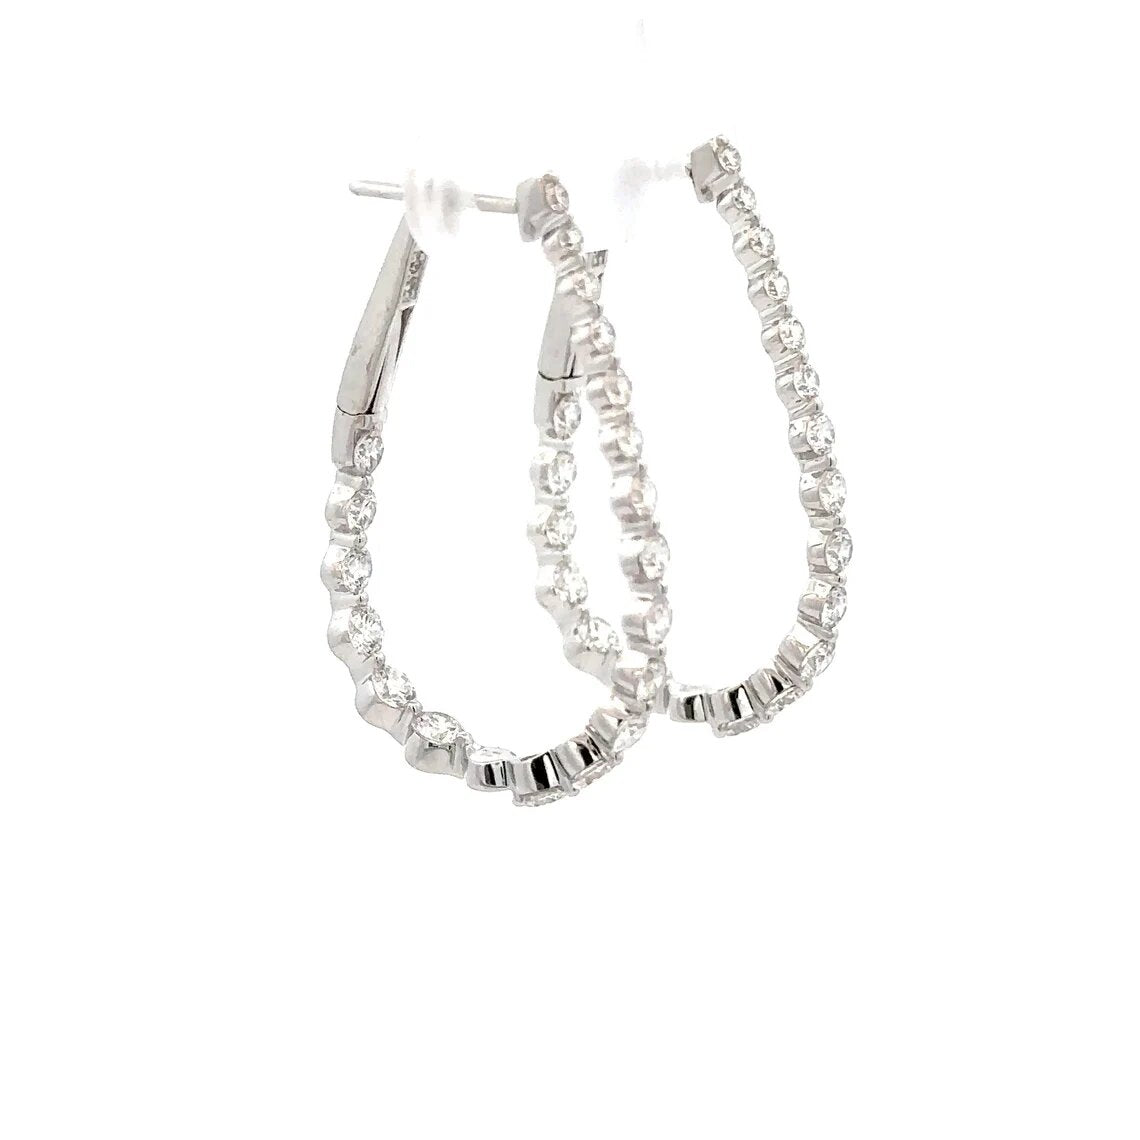 Natural Diamond Chain & Bead Hanging Earrings in 18k White Gold